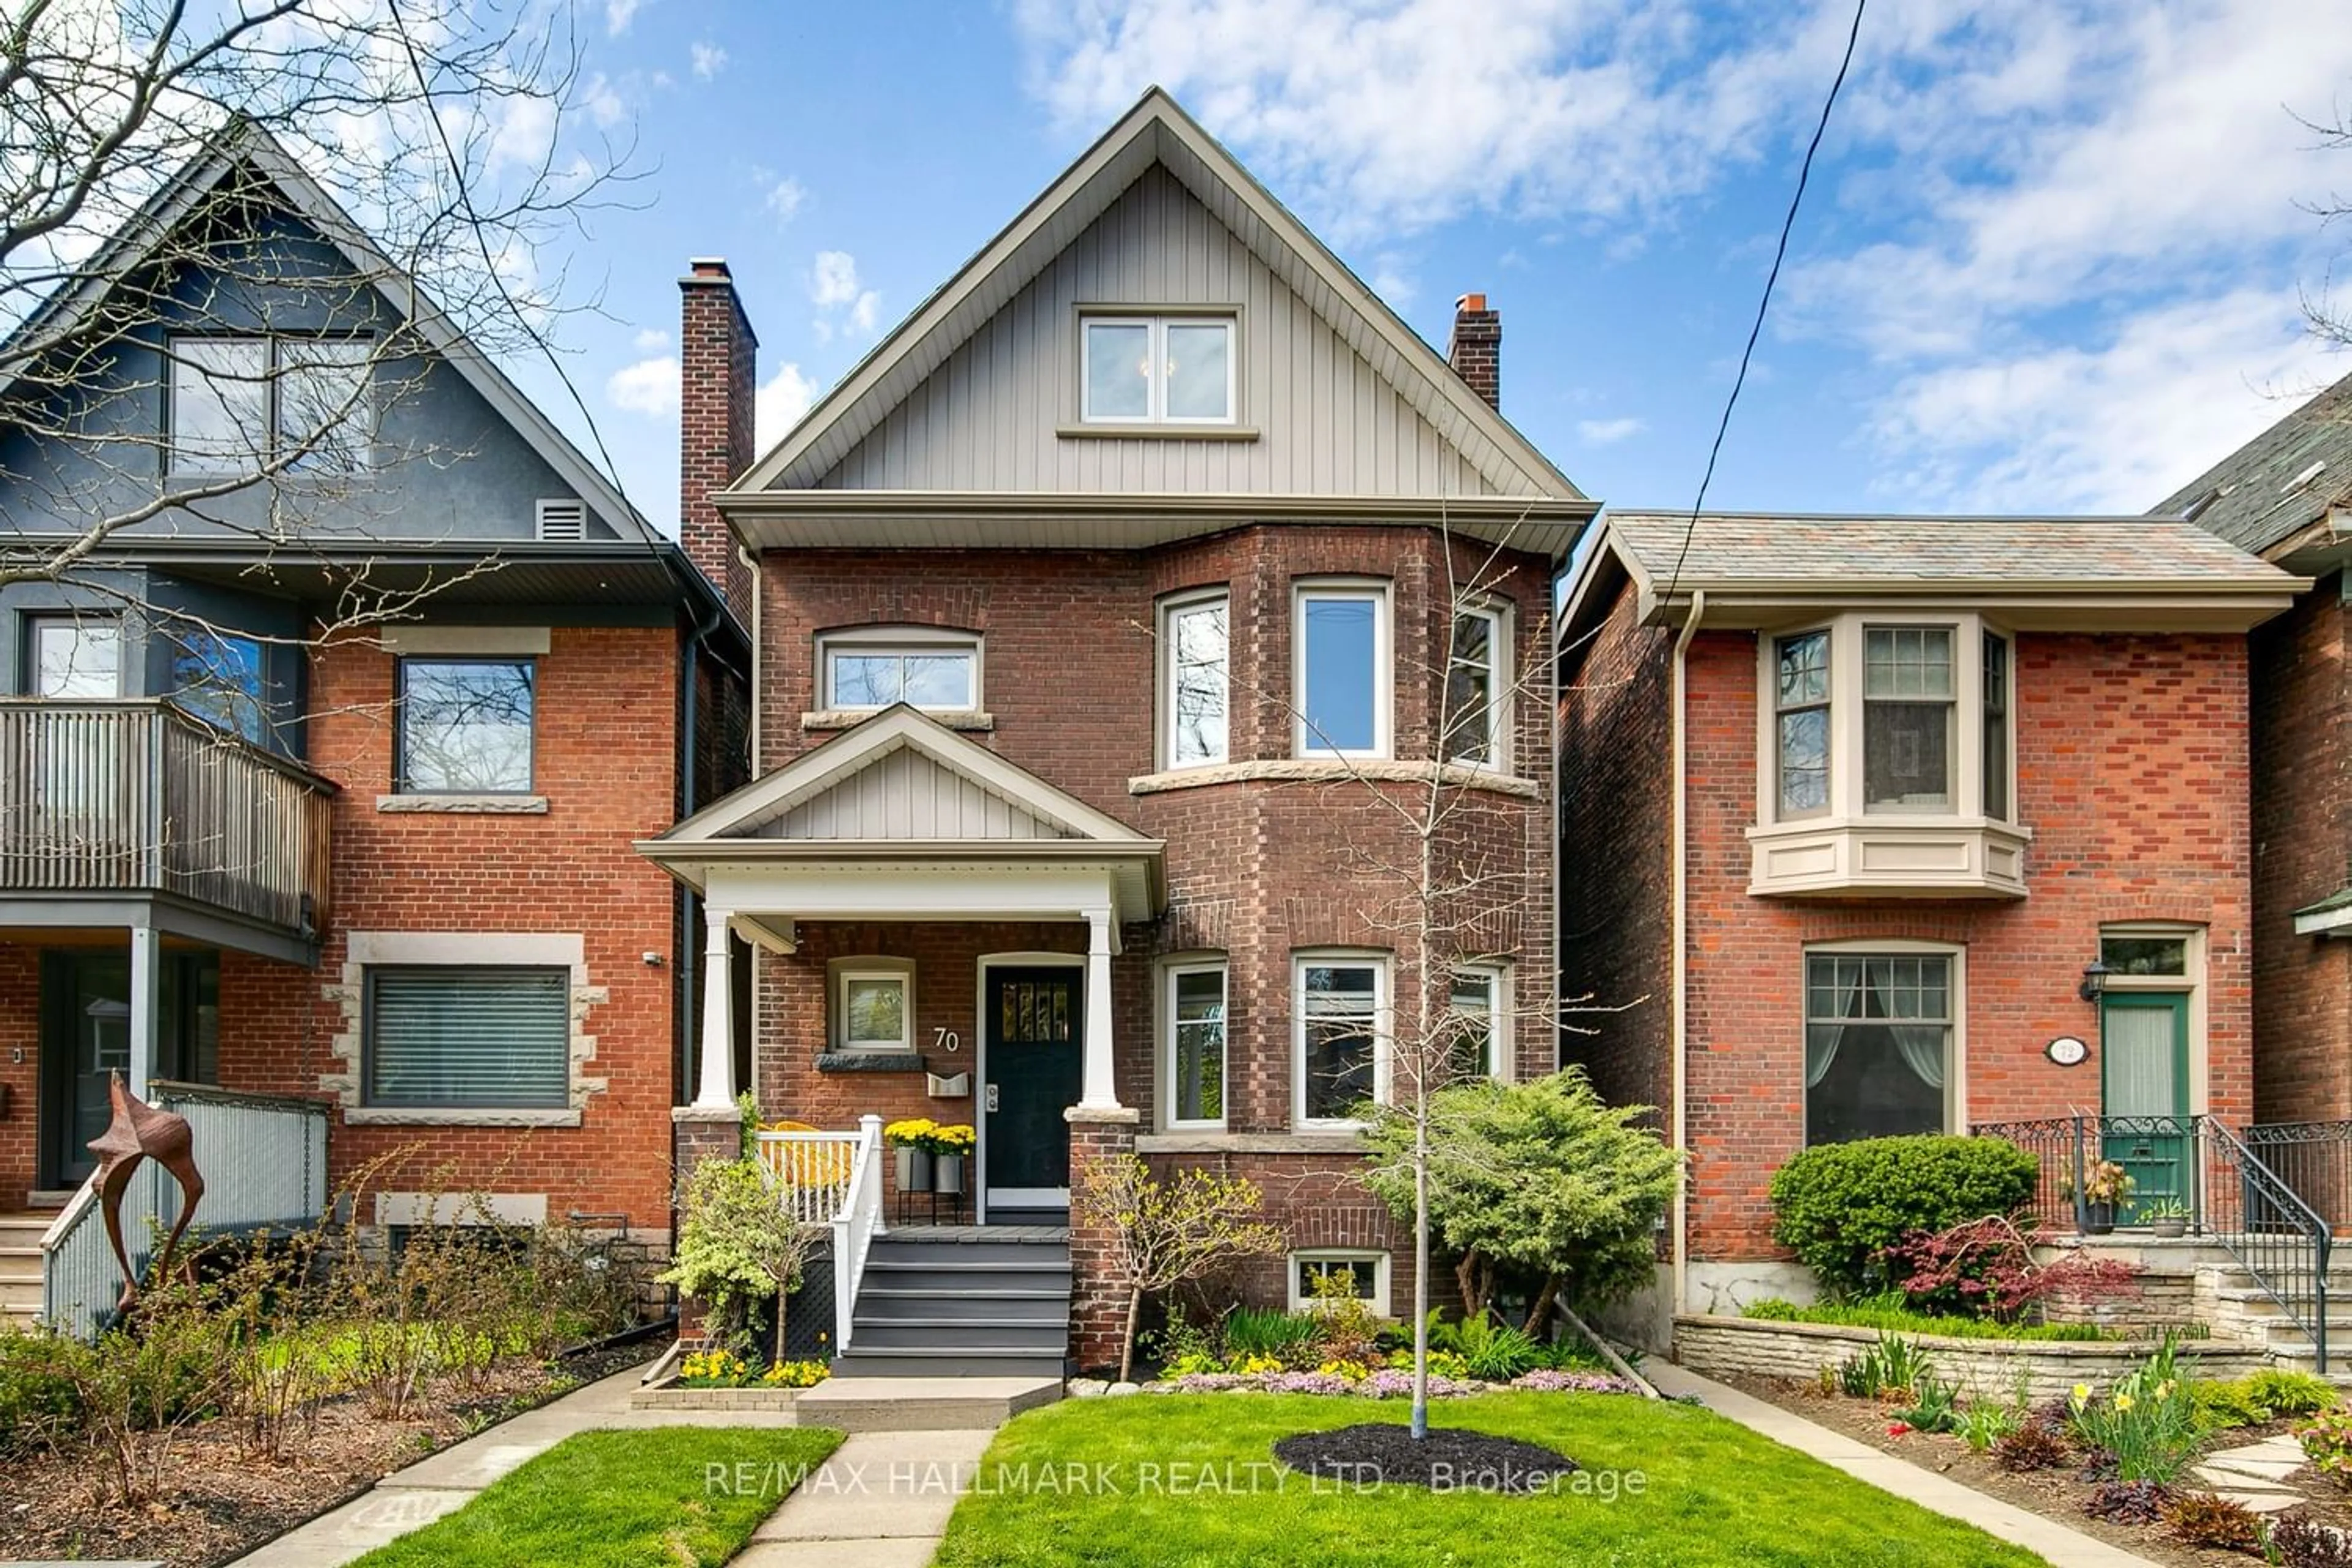 Home with brick exterior material for 70 Dearbourne Ave, Toronto Ontario M4K 1M7